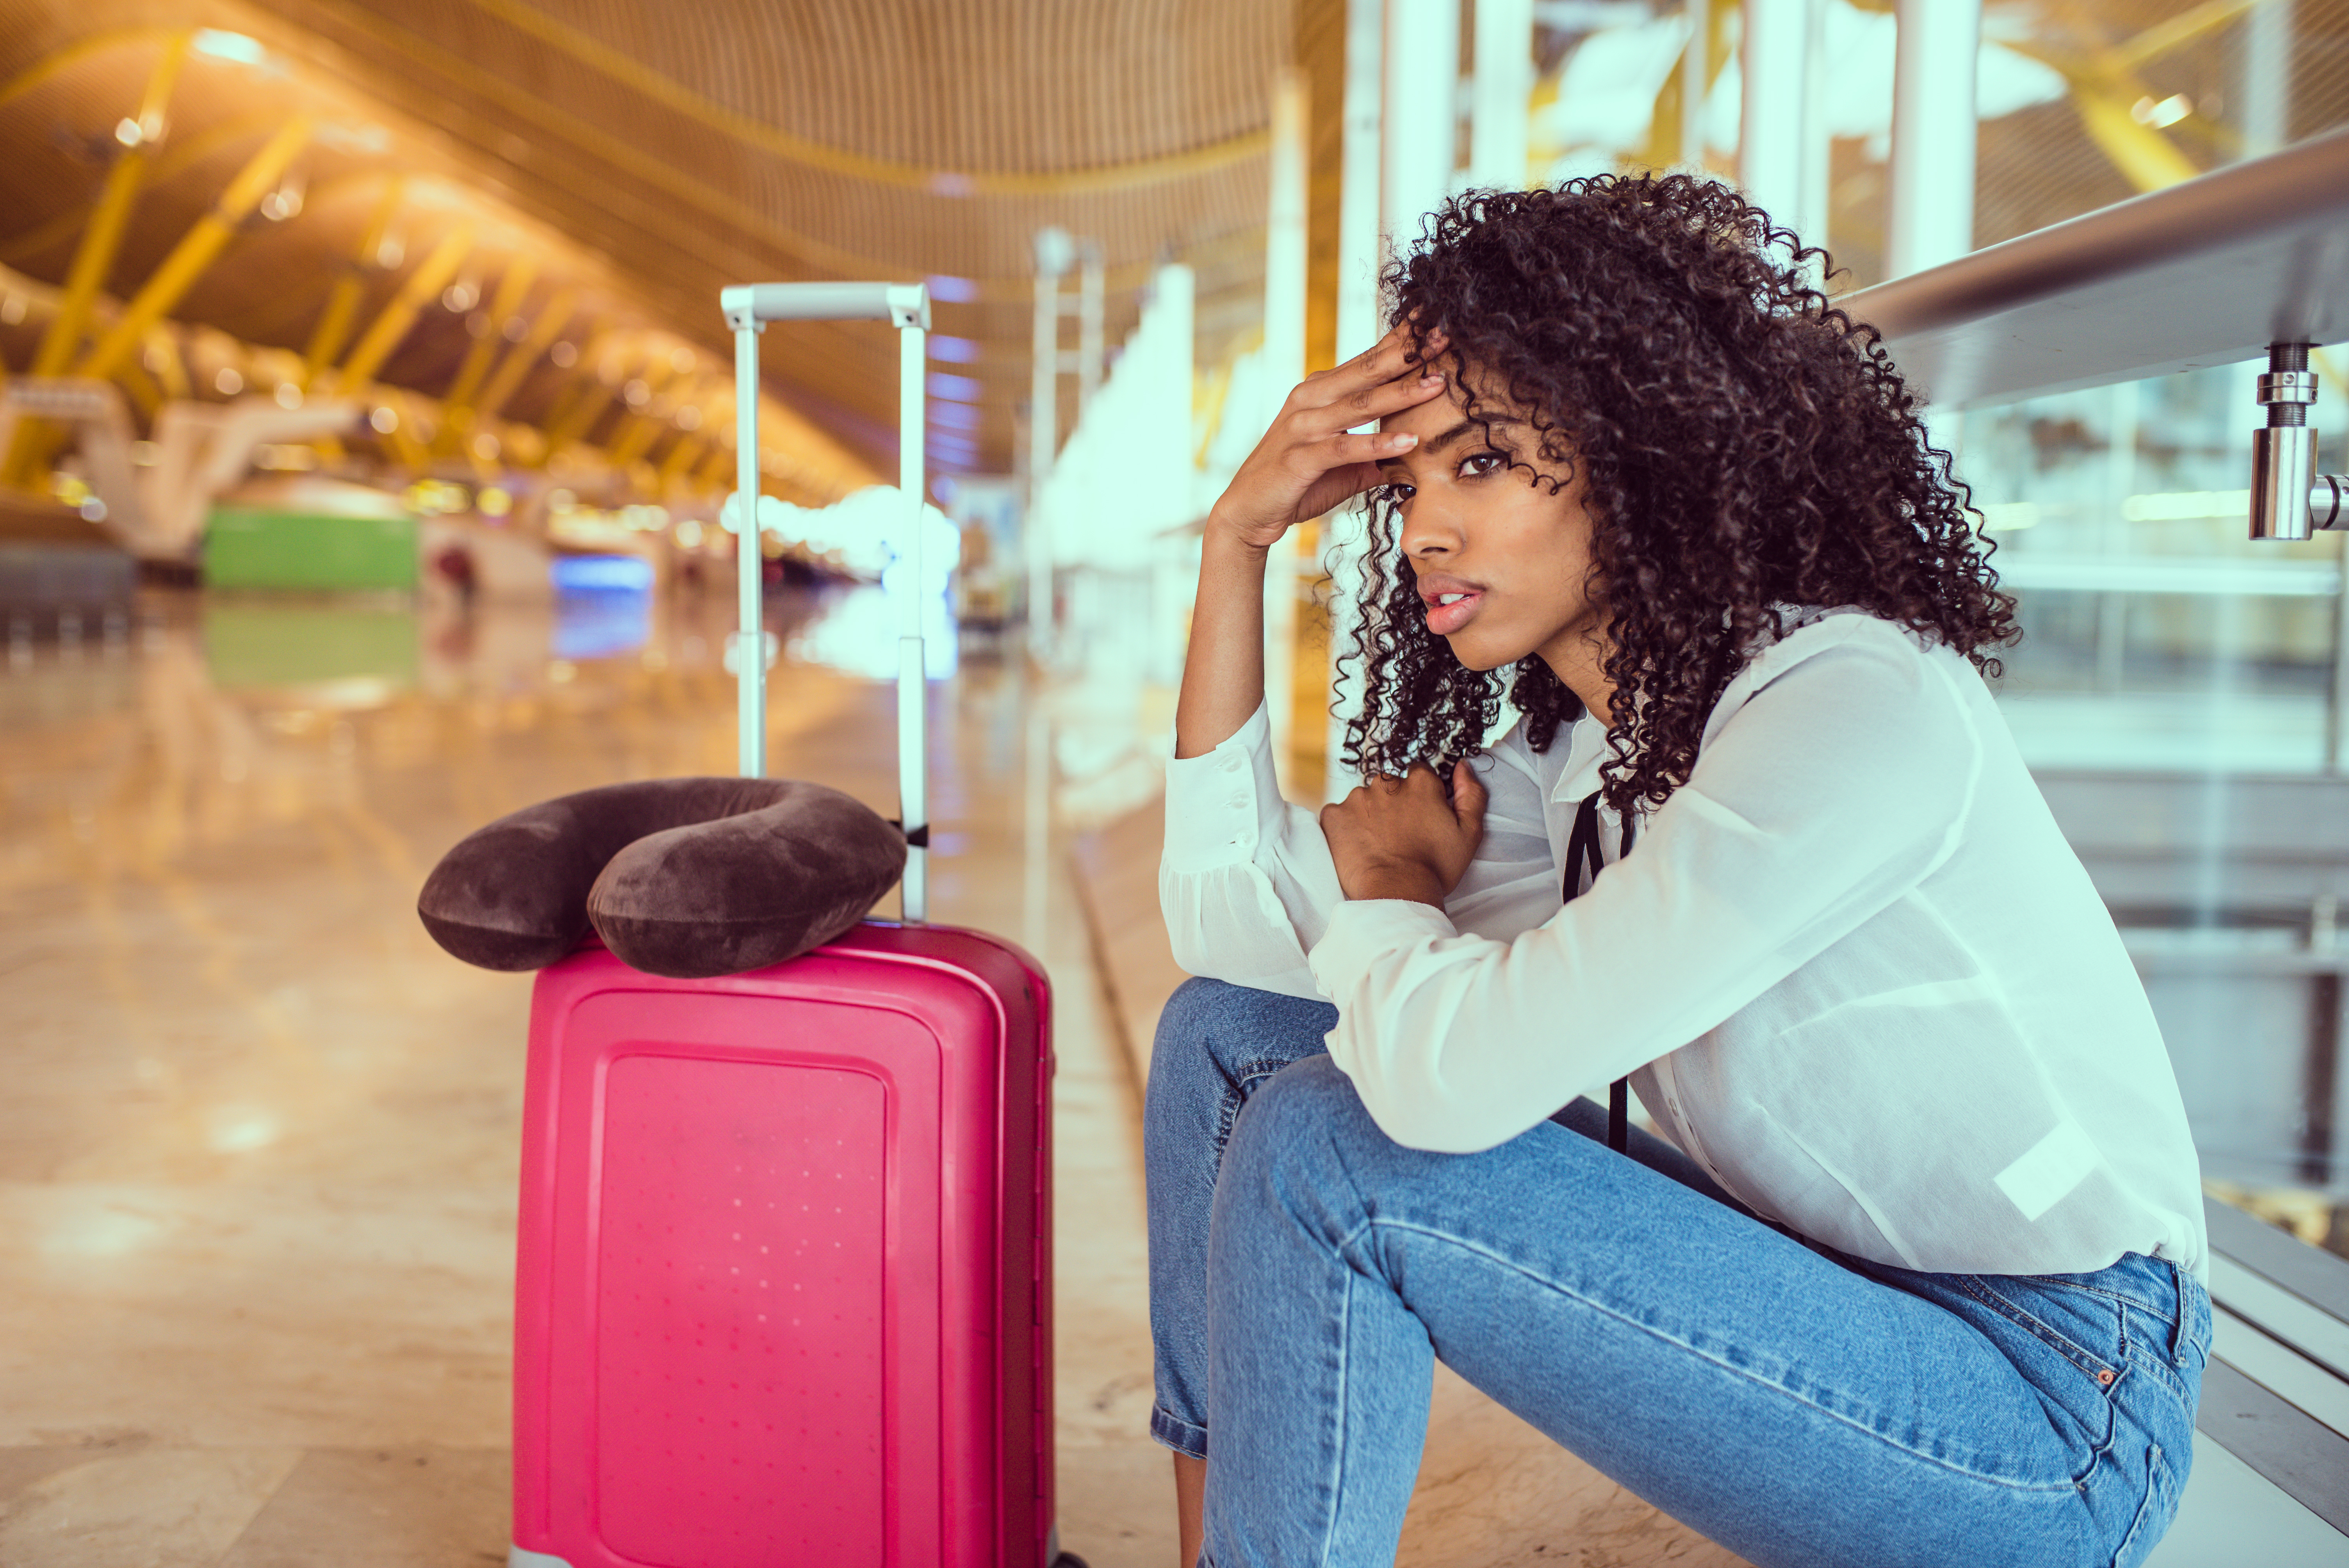 Woman sitting in airport looking frustrated